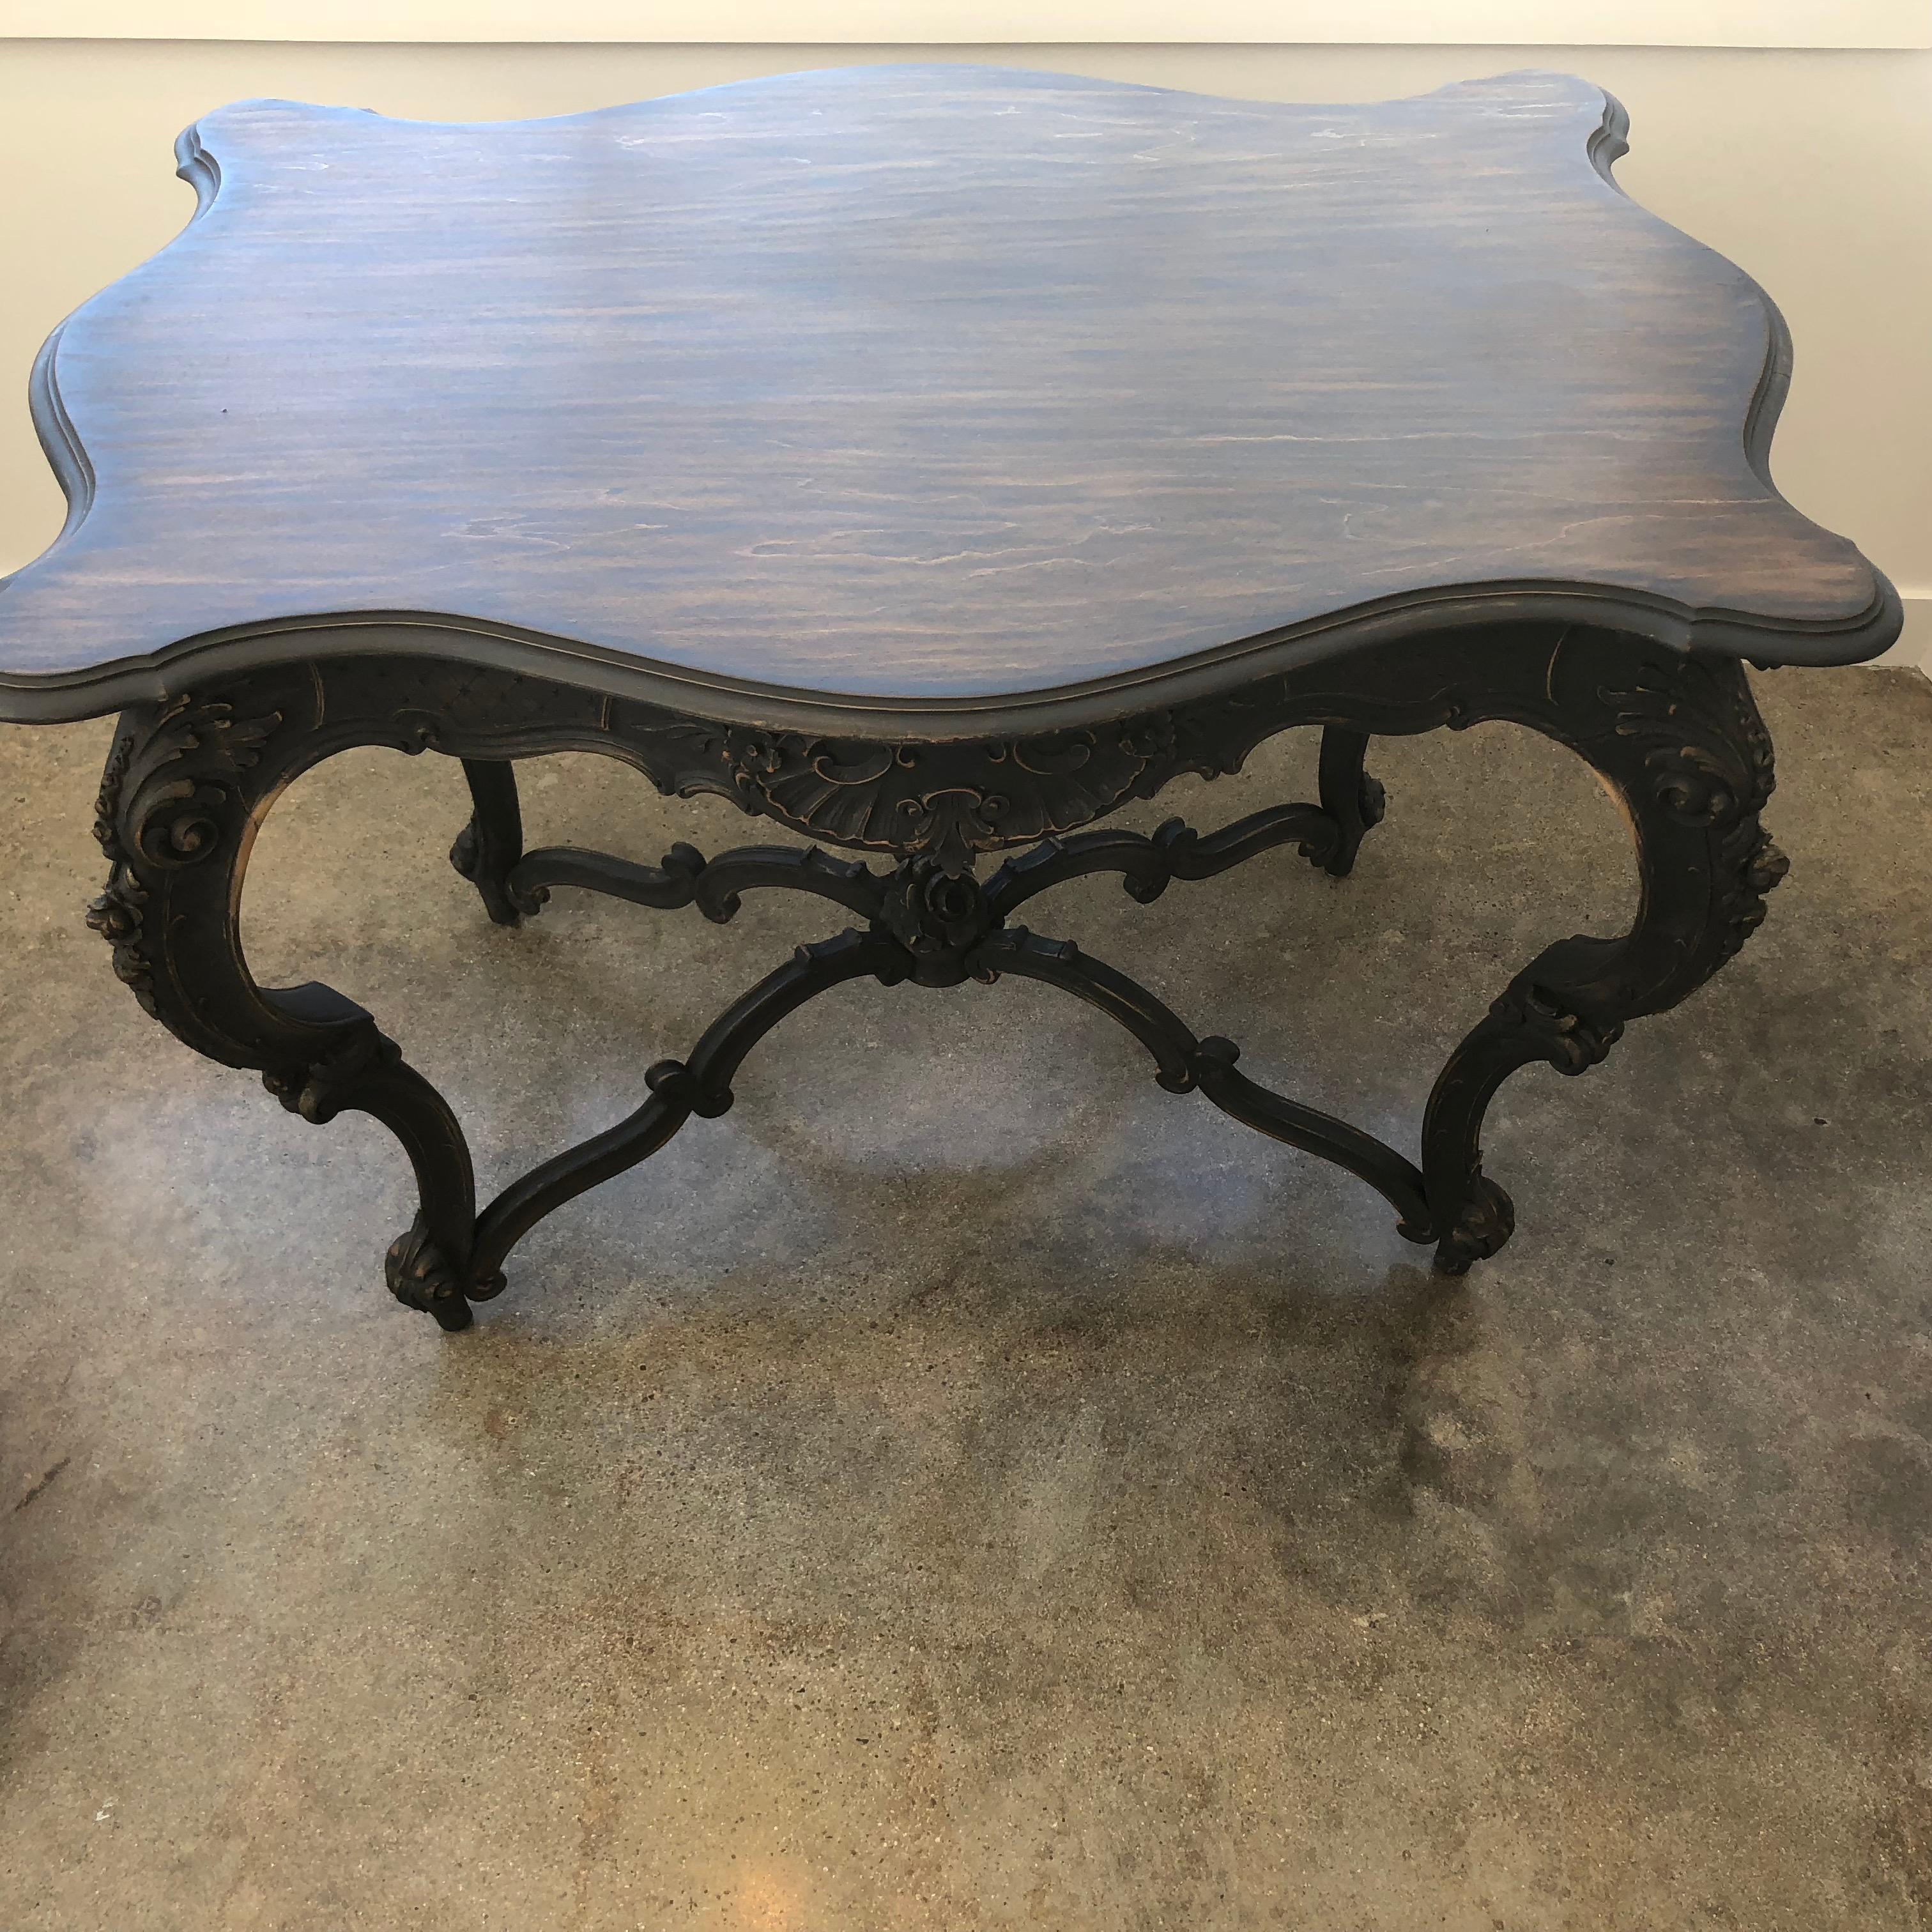 Gorgeous Rococo table, circa 1880. It has detailed elegant carving. The finish in black/deep brown has further enhanced the wonderful grain on top. The piece has real presence.